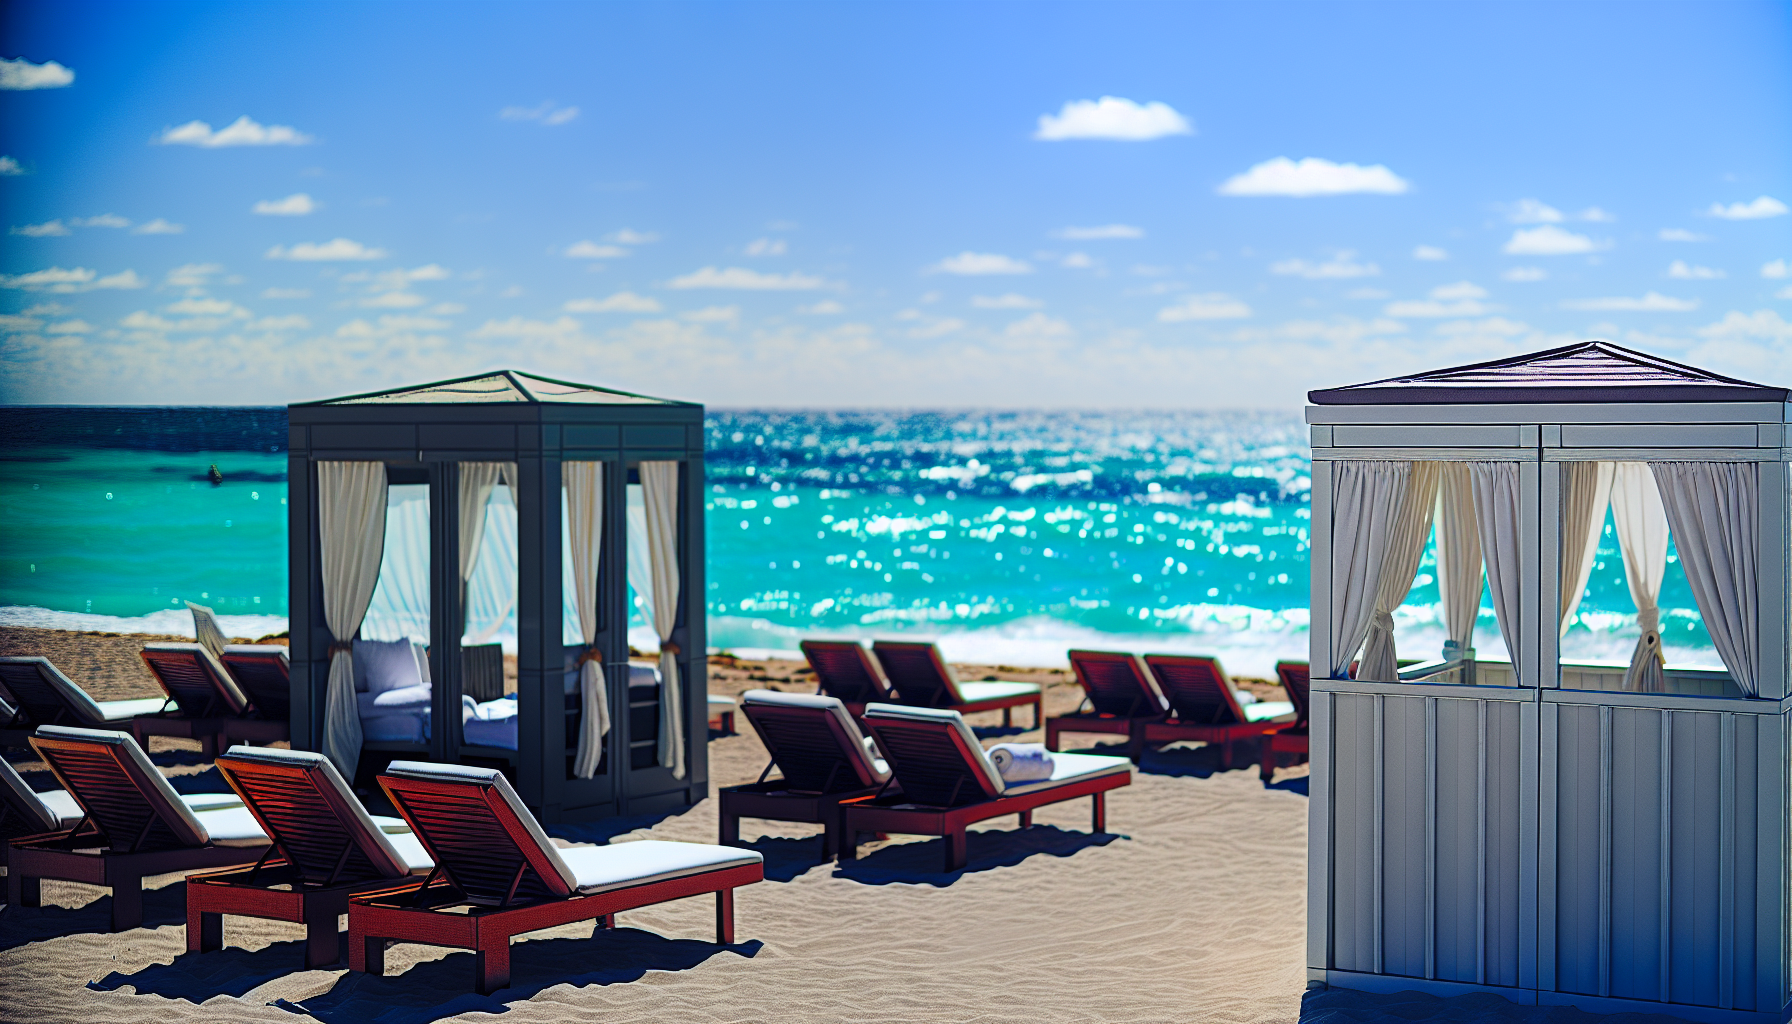 Luxurious beachfront view with beach chairs and private cabanas at Ritz Carlton Fort Lauderdale